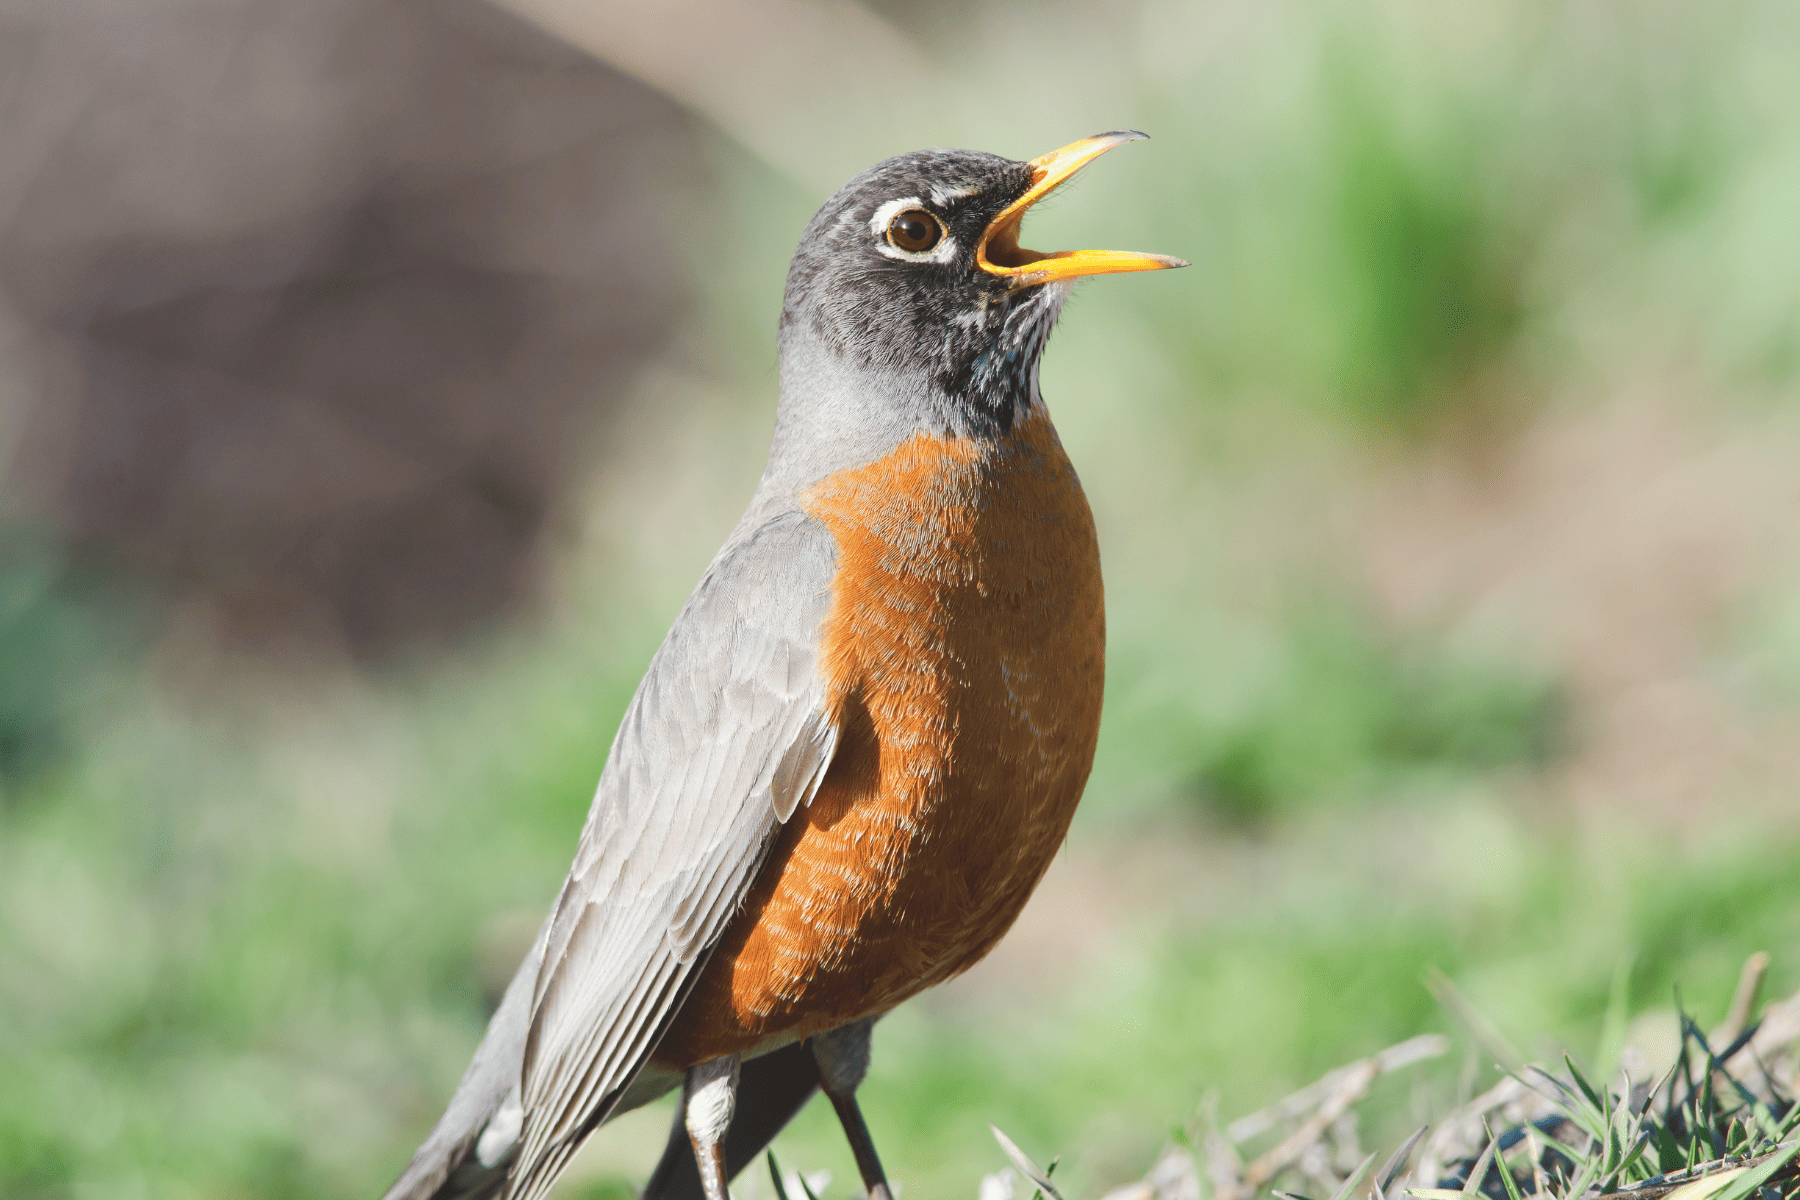 A spring robin singing his heart out.